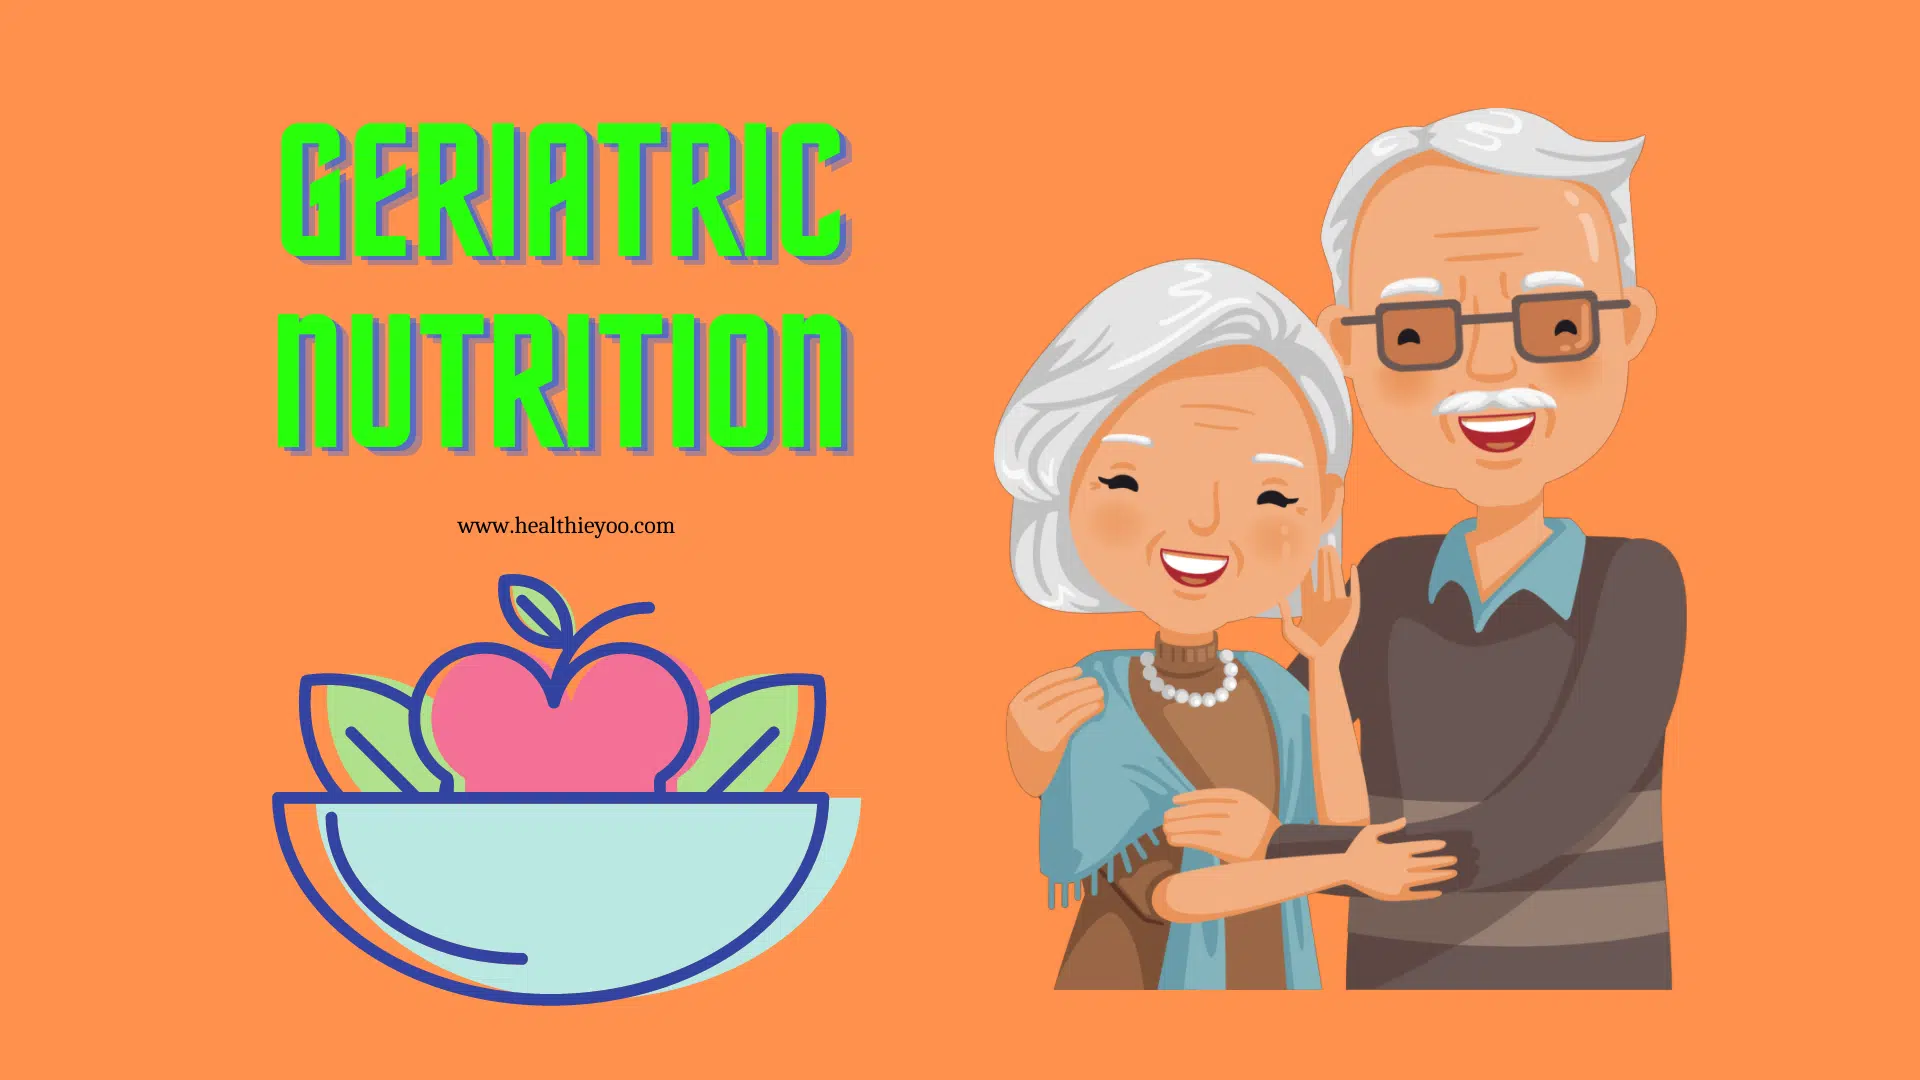 Geriatric Nutrition - The Science of Nutrition for the Elderly